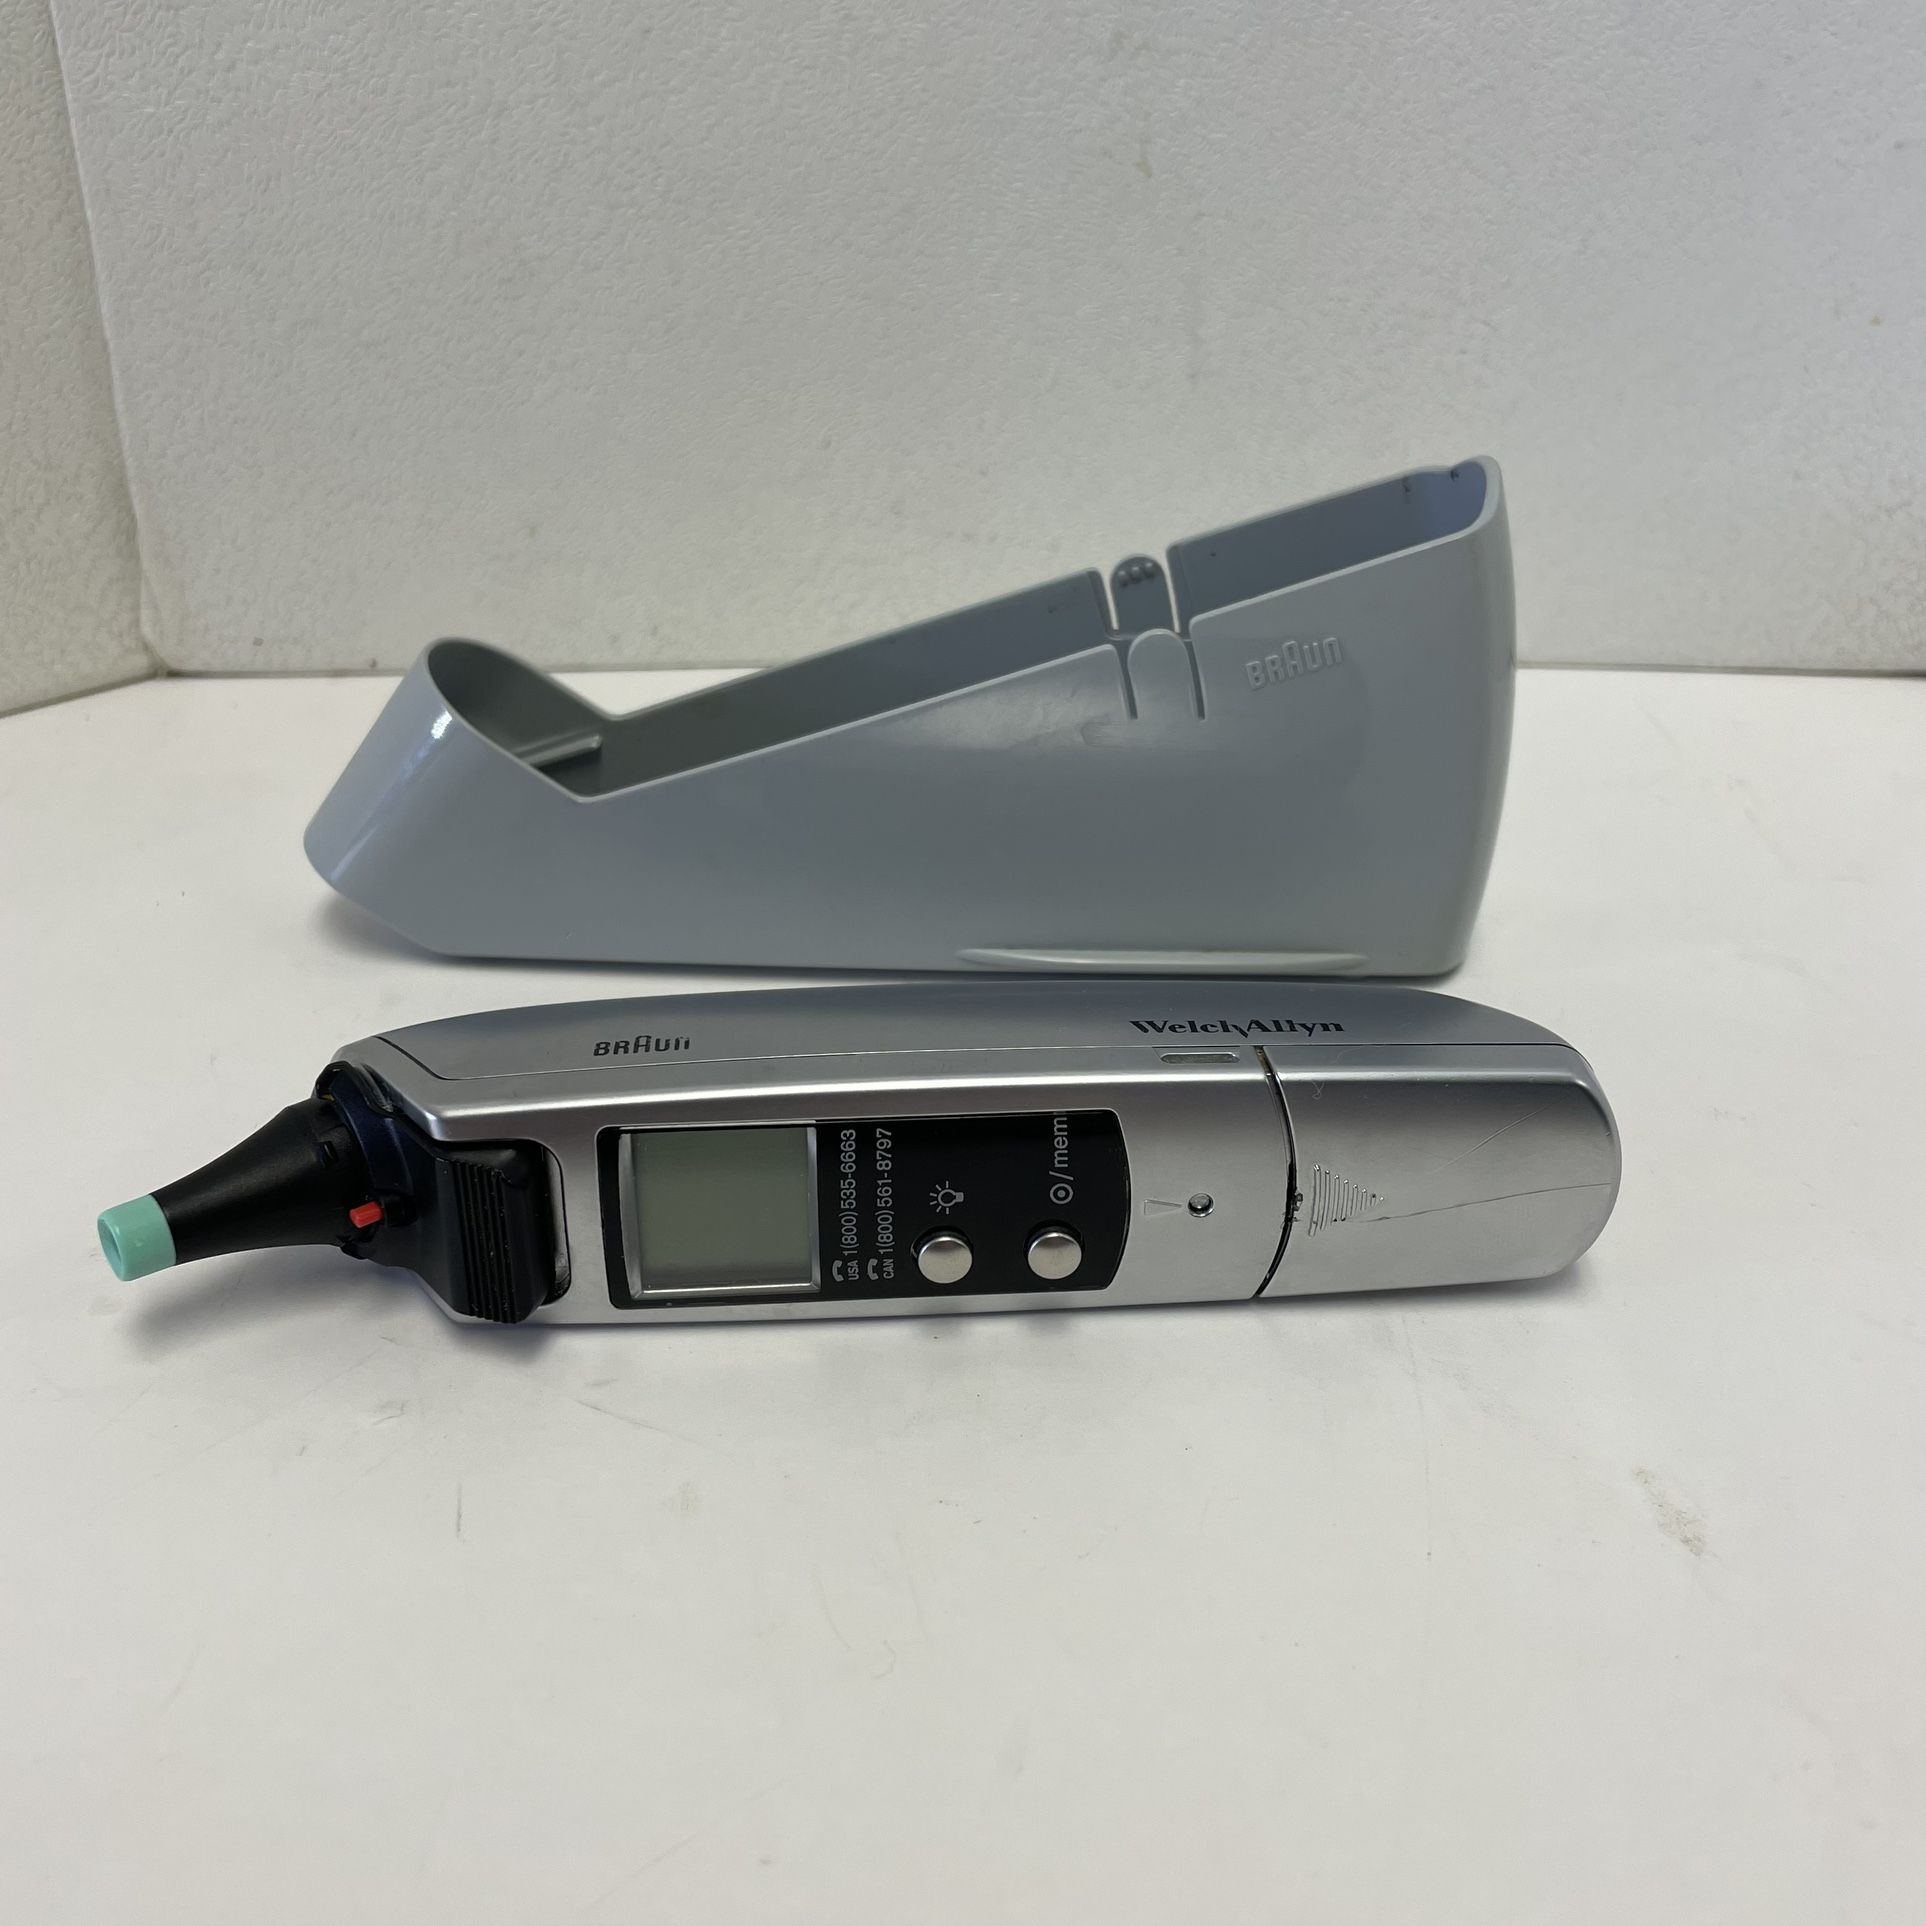 Welch Allyn Braun ThermoScan Type 6014 Ear Thermometer W/ Holster Holder Tested